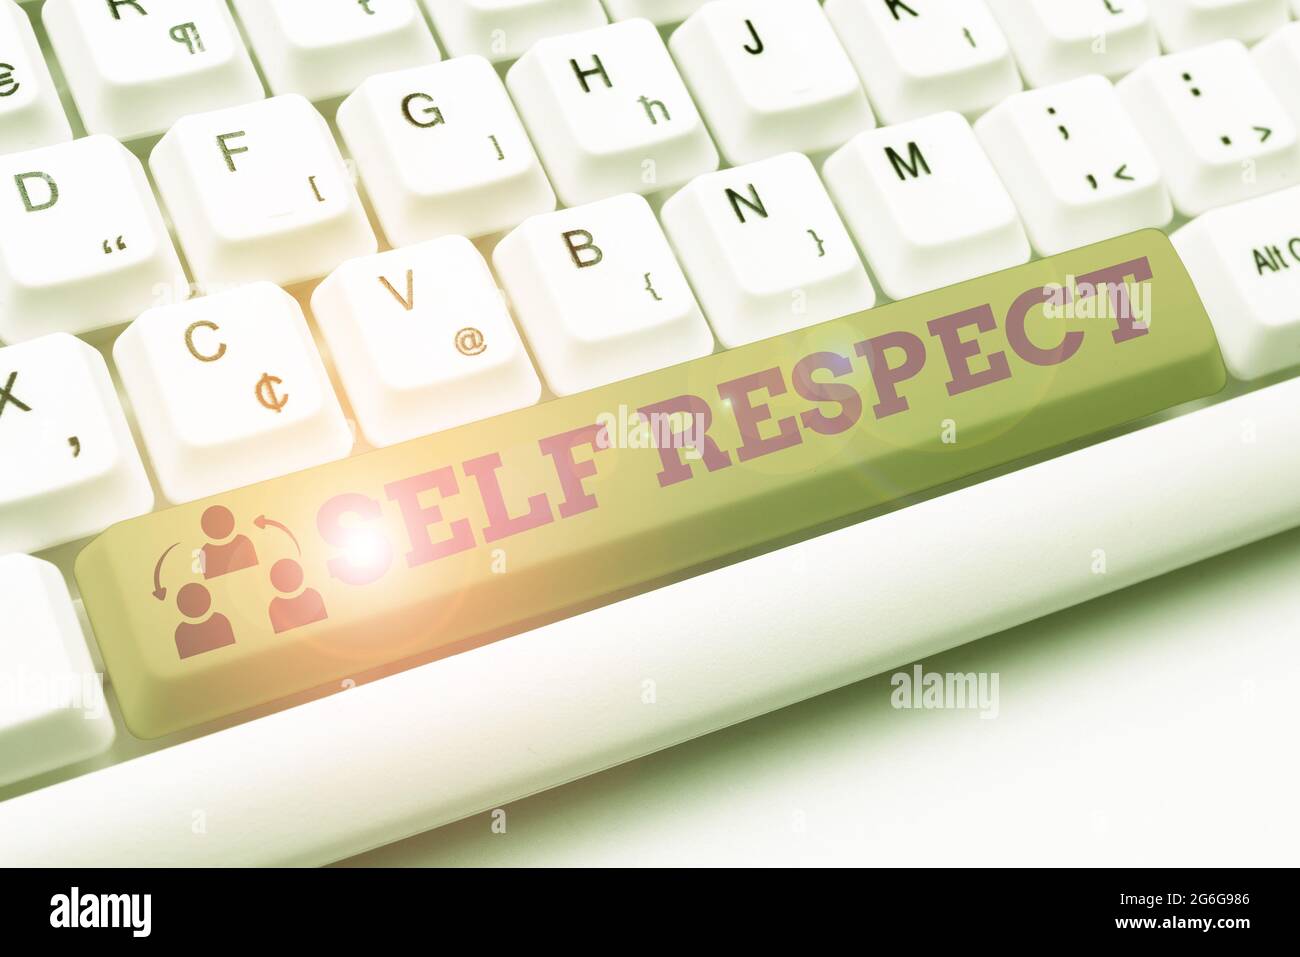 Writing displaying text Self Respect. Internet Concept Pride and confidence in oneself Stand up for yourself Typist Creating Company Documents Stock Photo